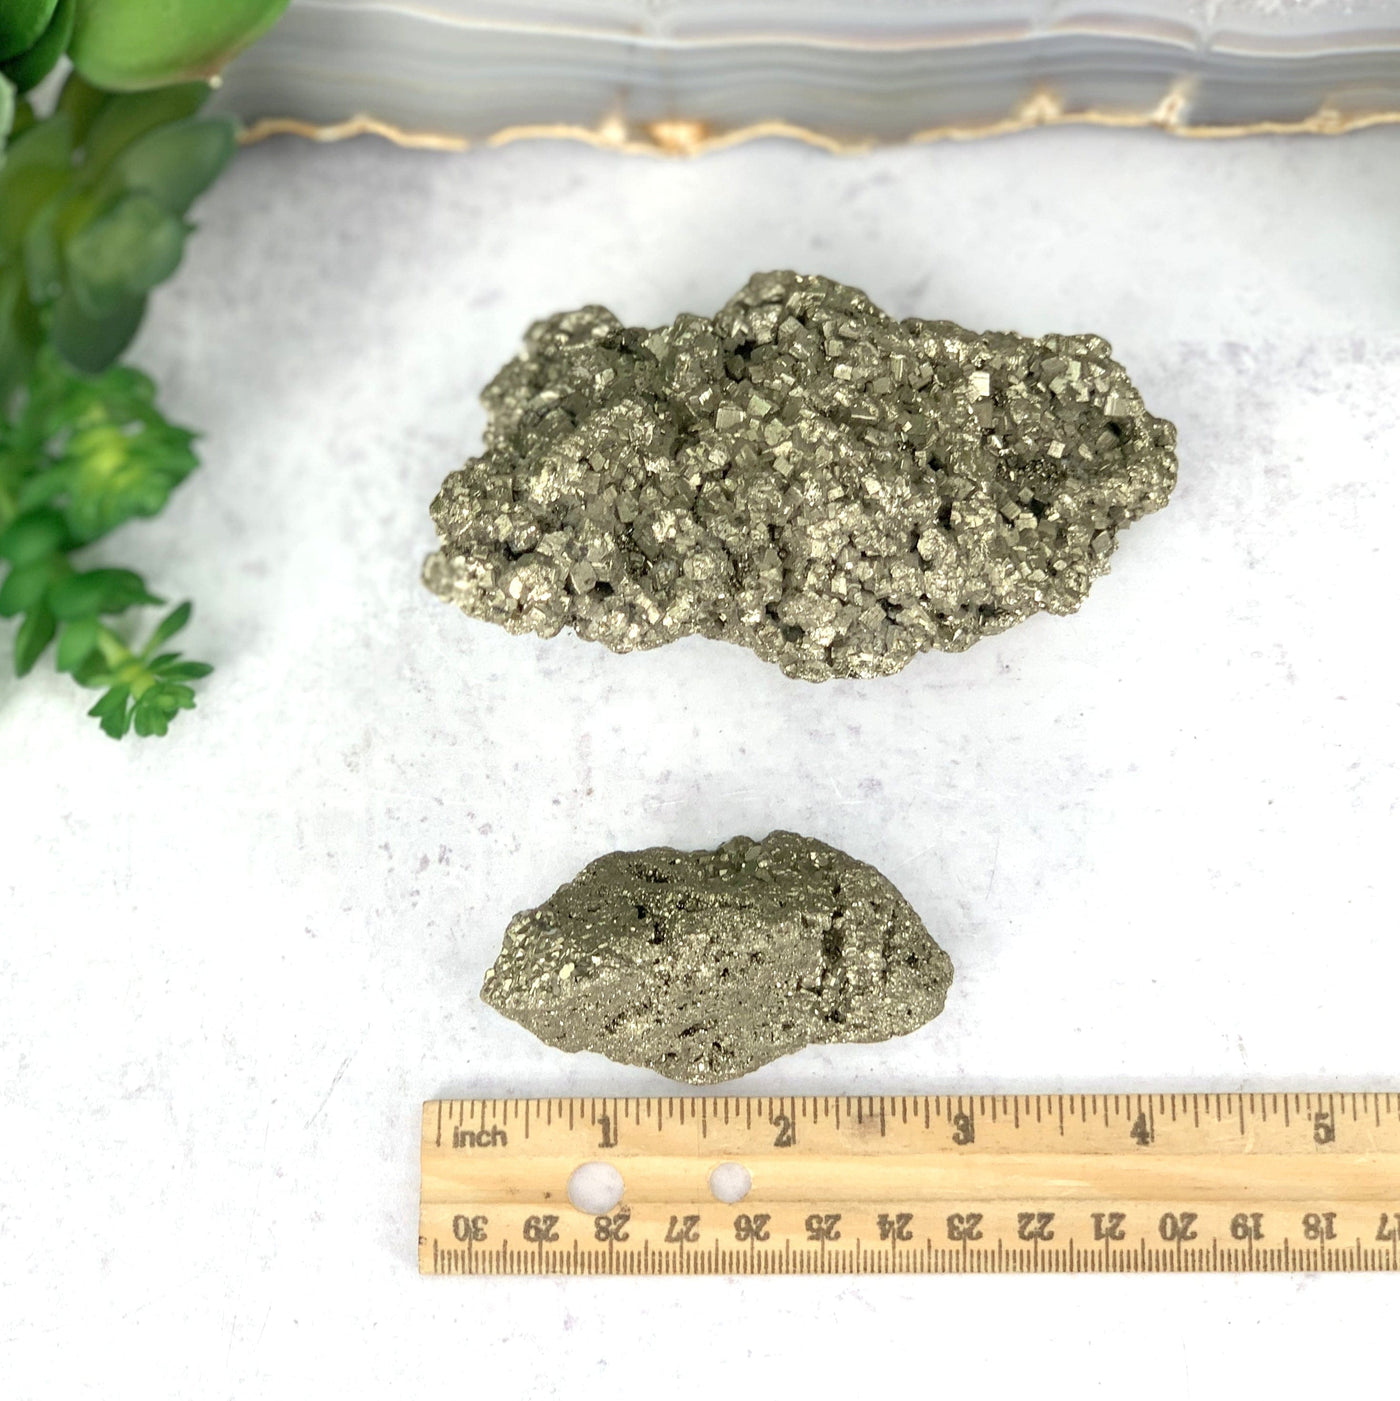 Two piece sets of the Pyrite Clusters comparing size to ruler